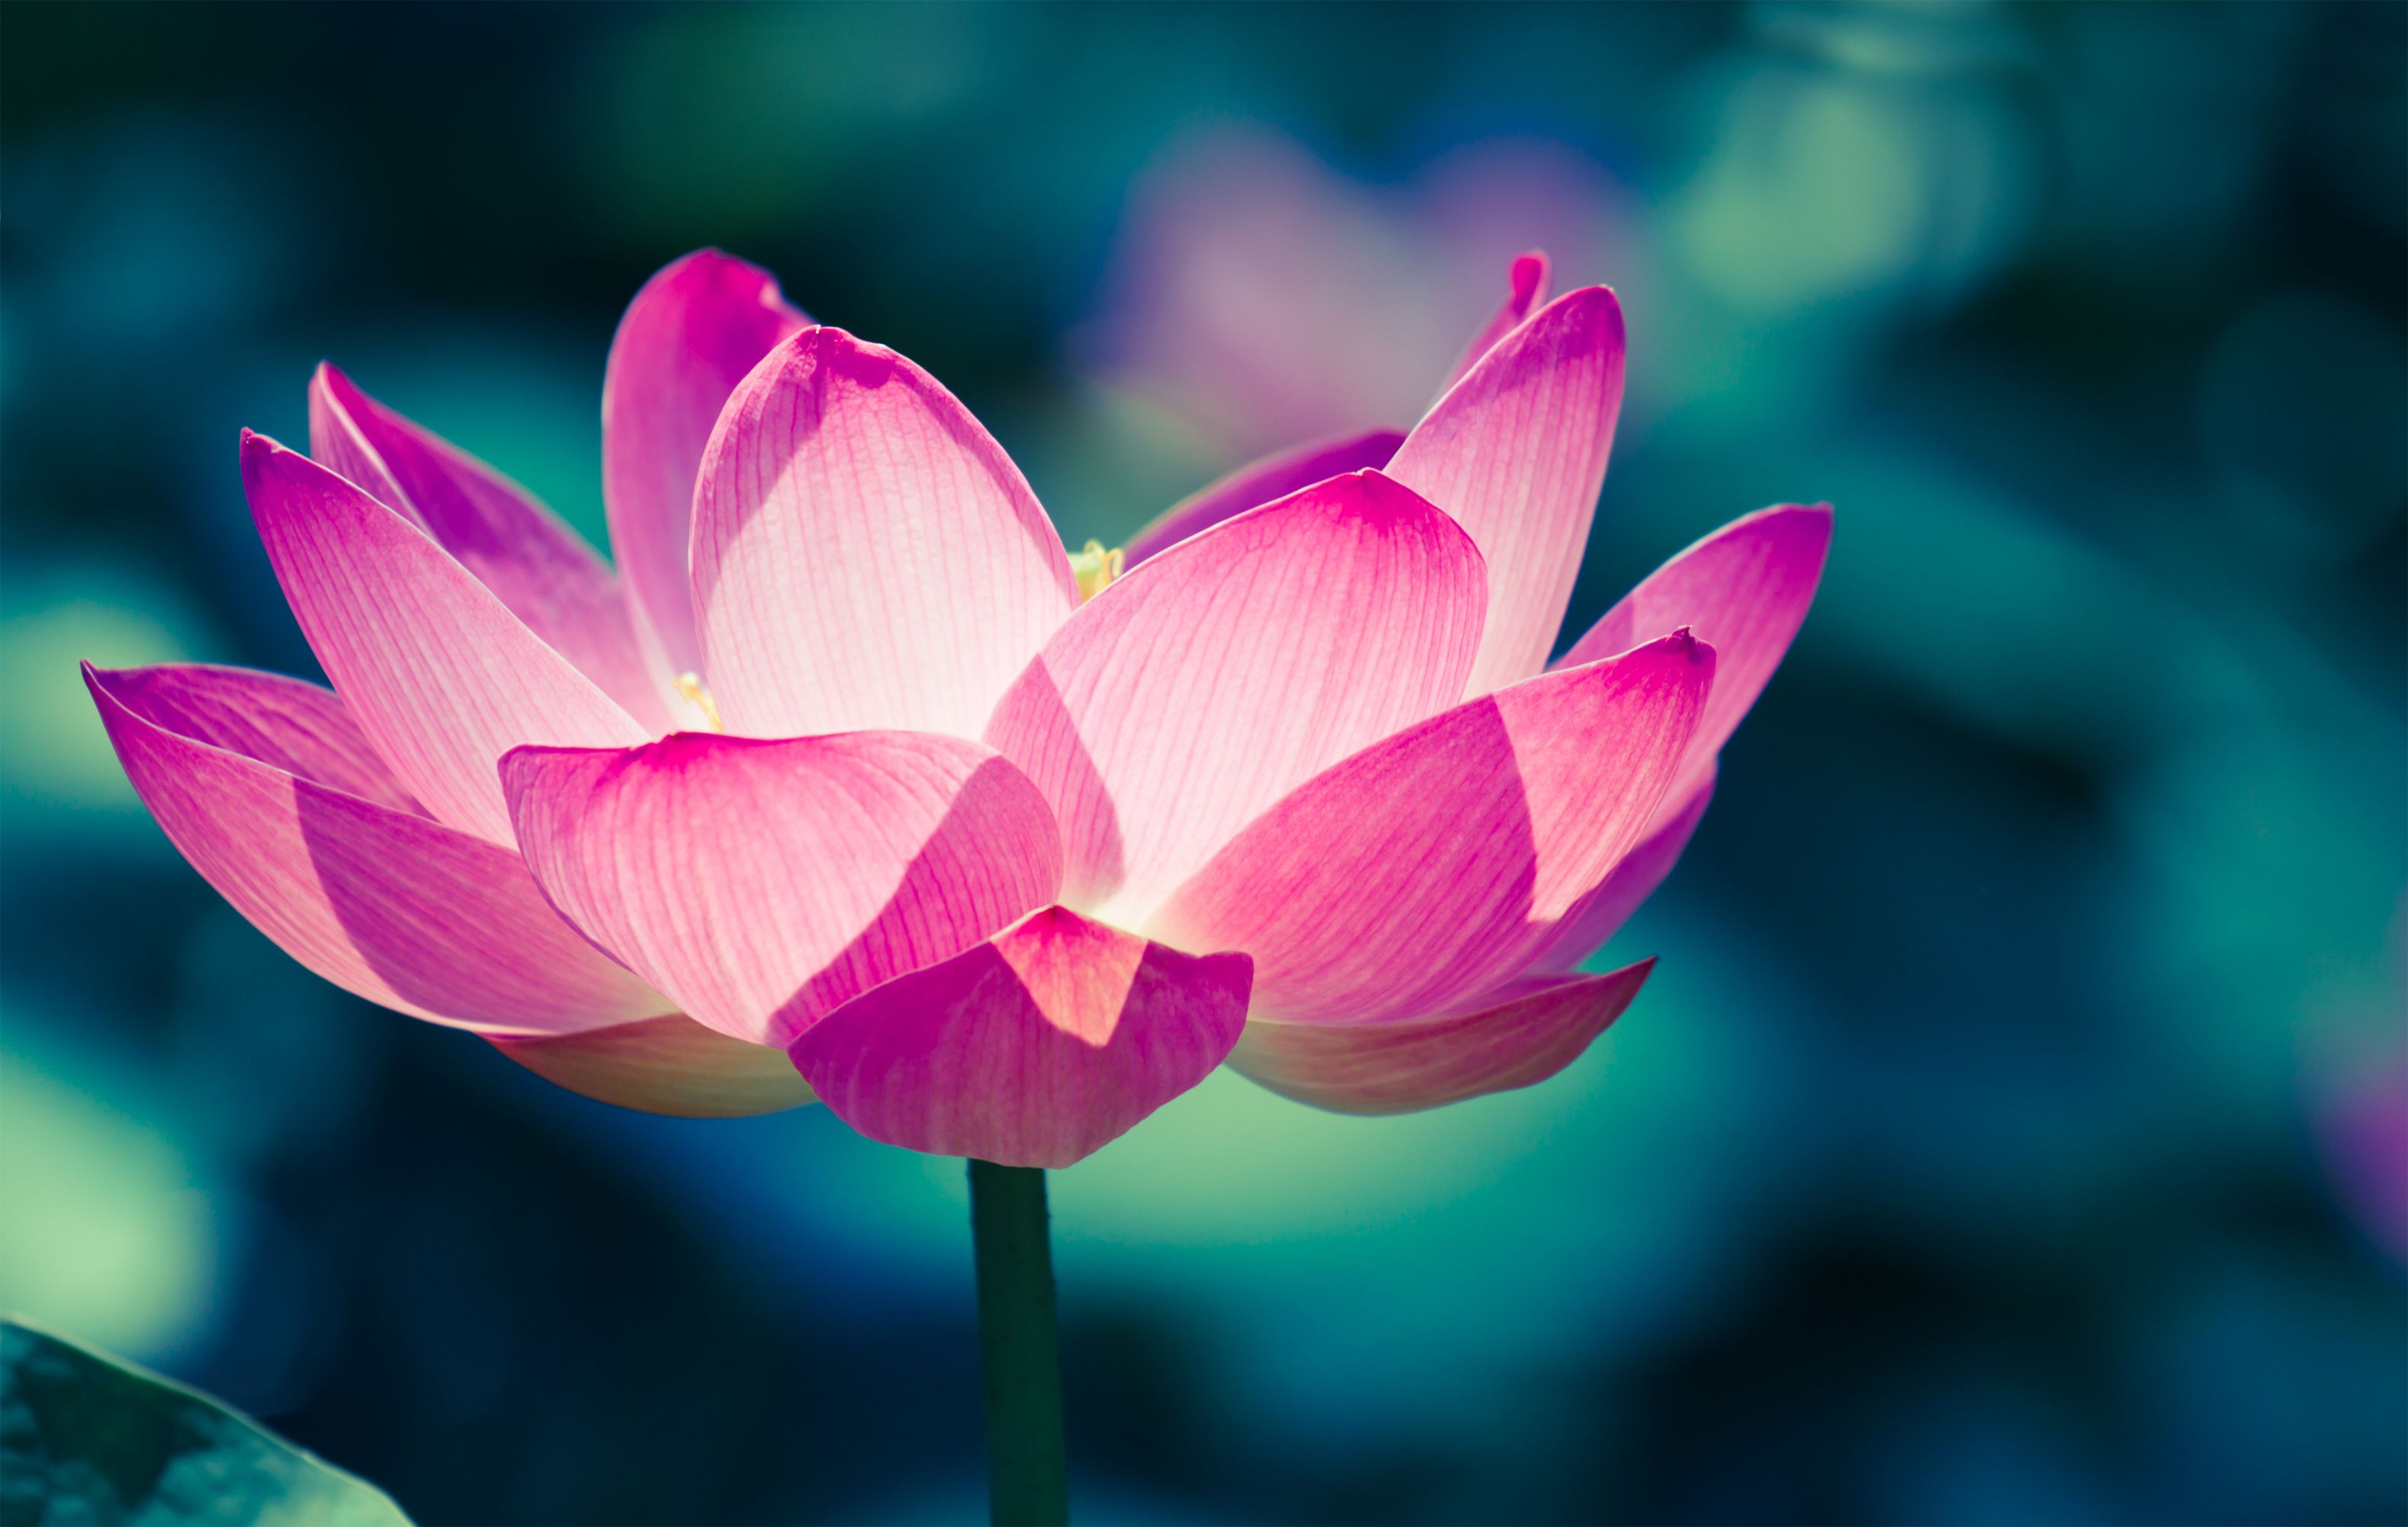 3158x2002 Lotus Flower Meaning What Is The Symbolism Behind The Lotus